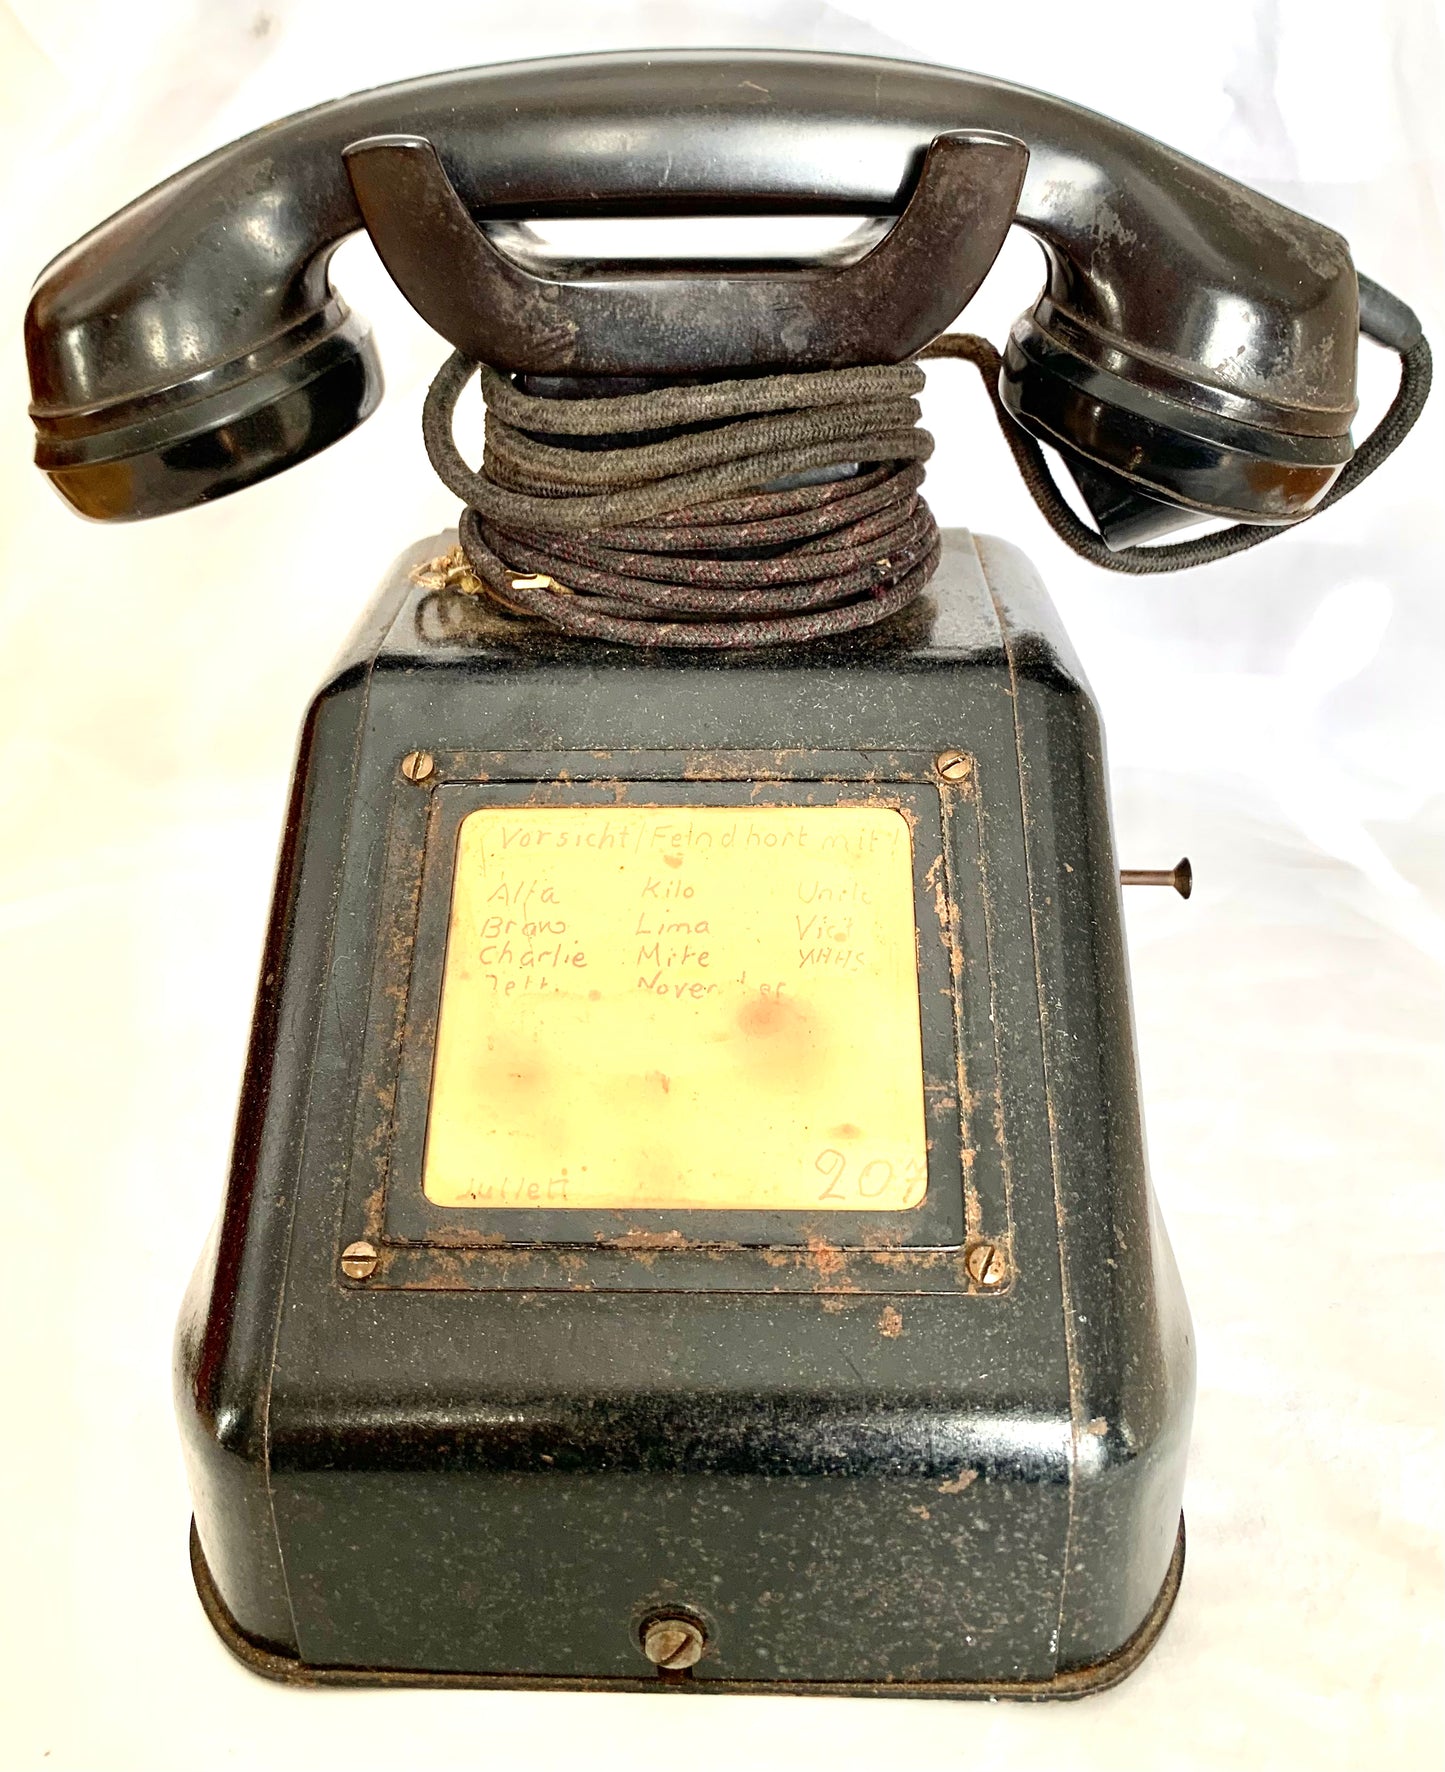 WW2 German Artillery telephone from Normandy.